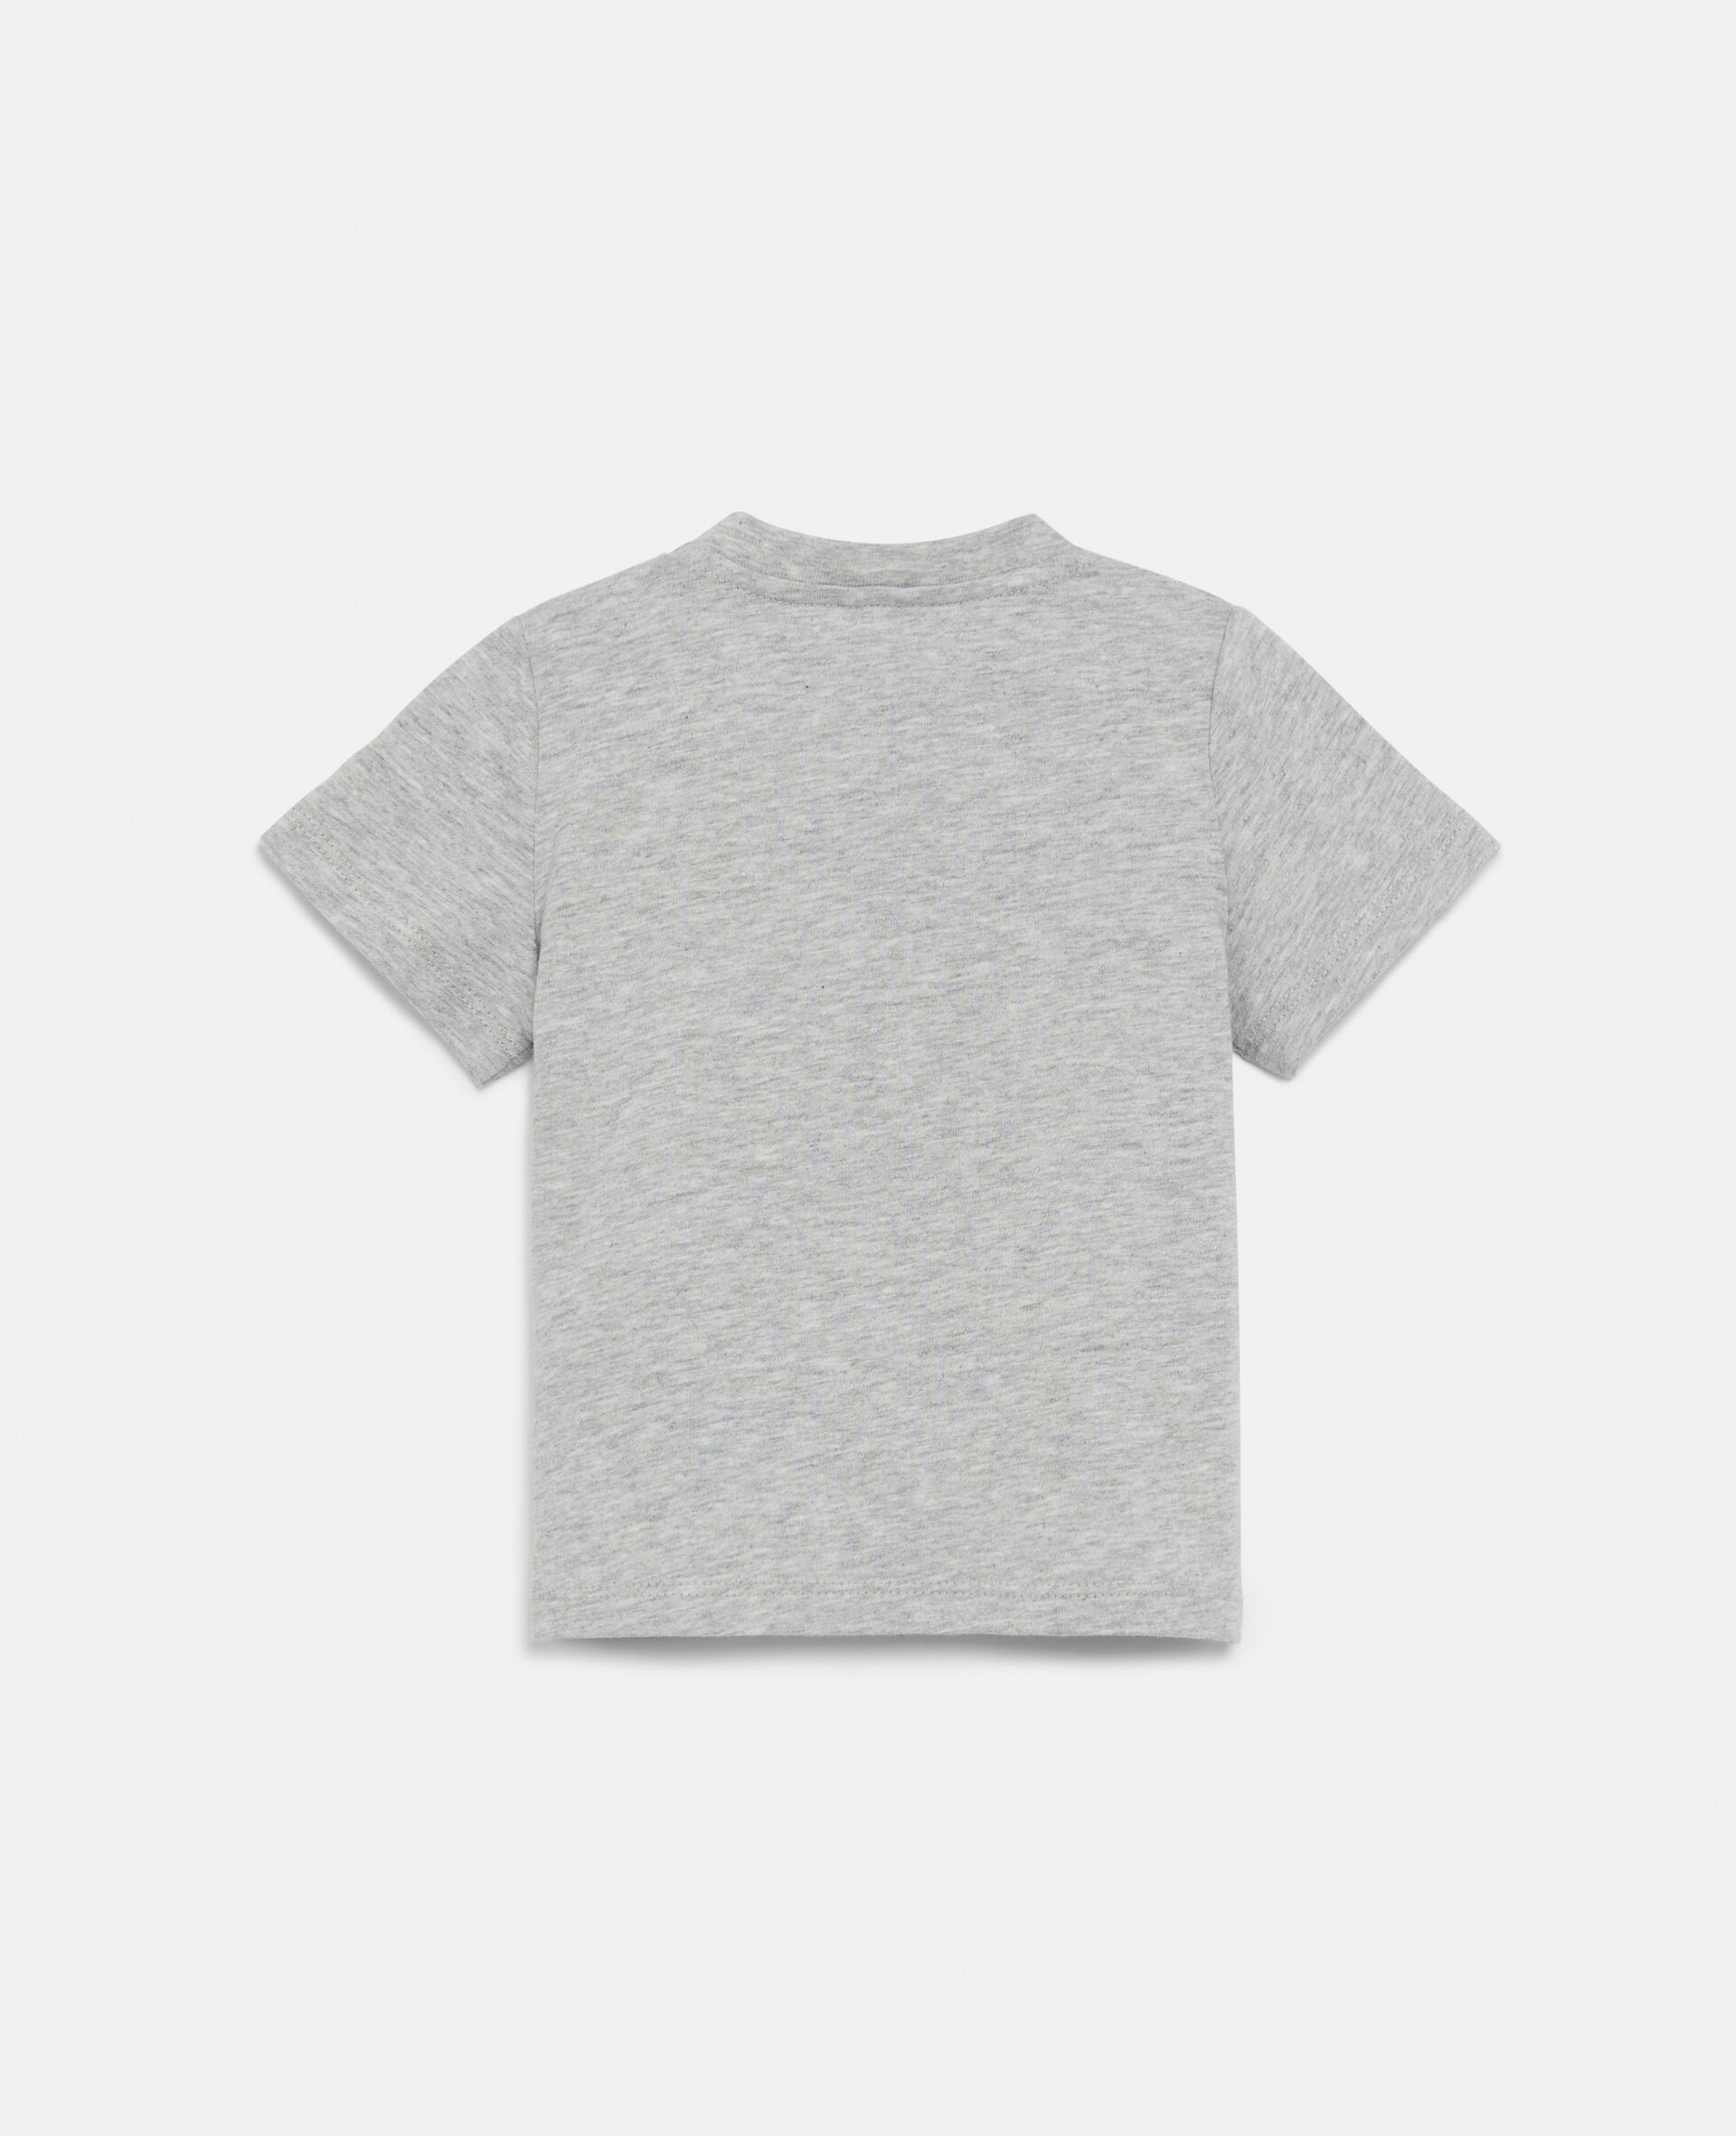 Beachball Cotton T-Shirt-Grey-large image number 2